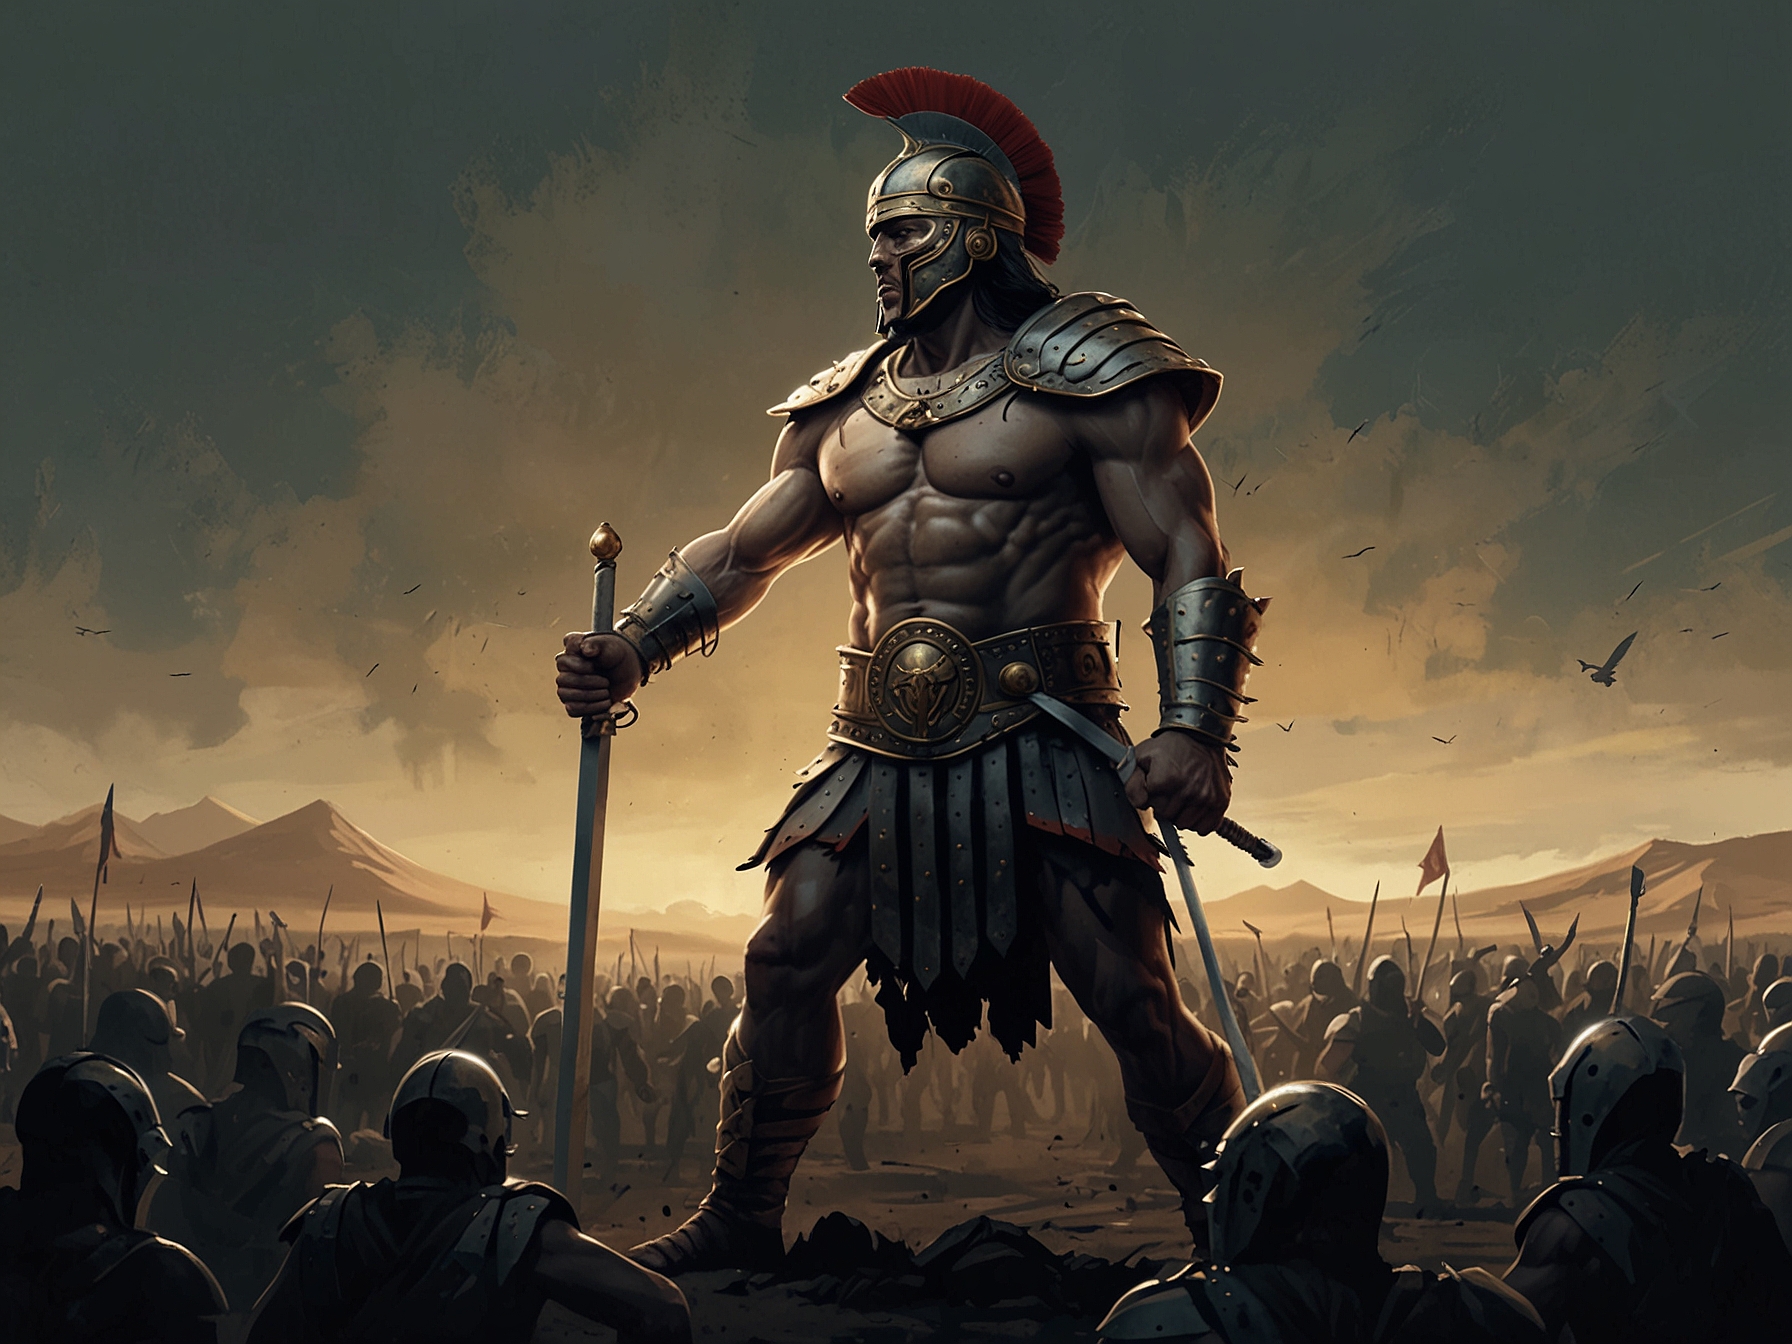 A depiction of migrants characterized as gladiators, highlighting the inhumane and barbaric nature of Trump's proposed idea. The image aims to evoke the ethical and moral concerns raised by his rhetoric.